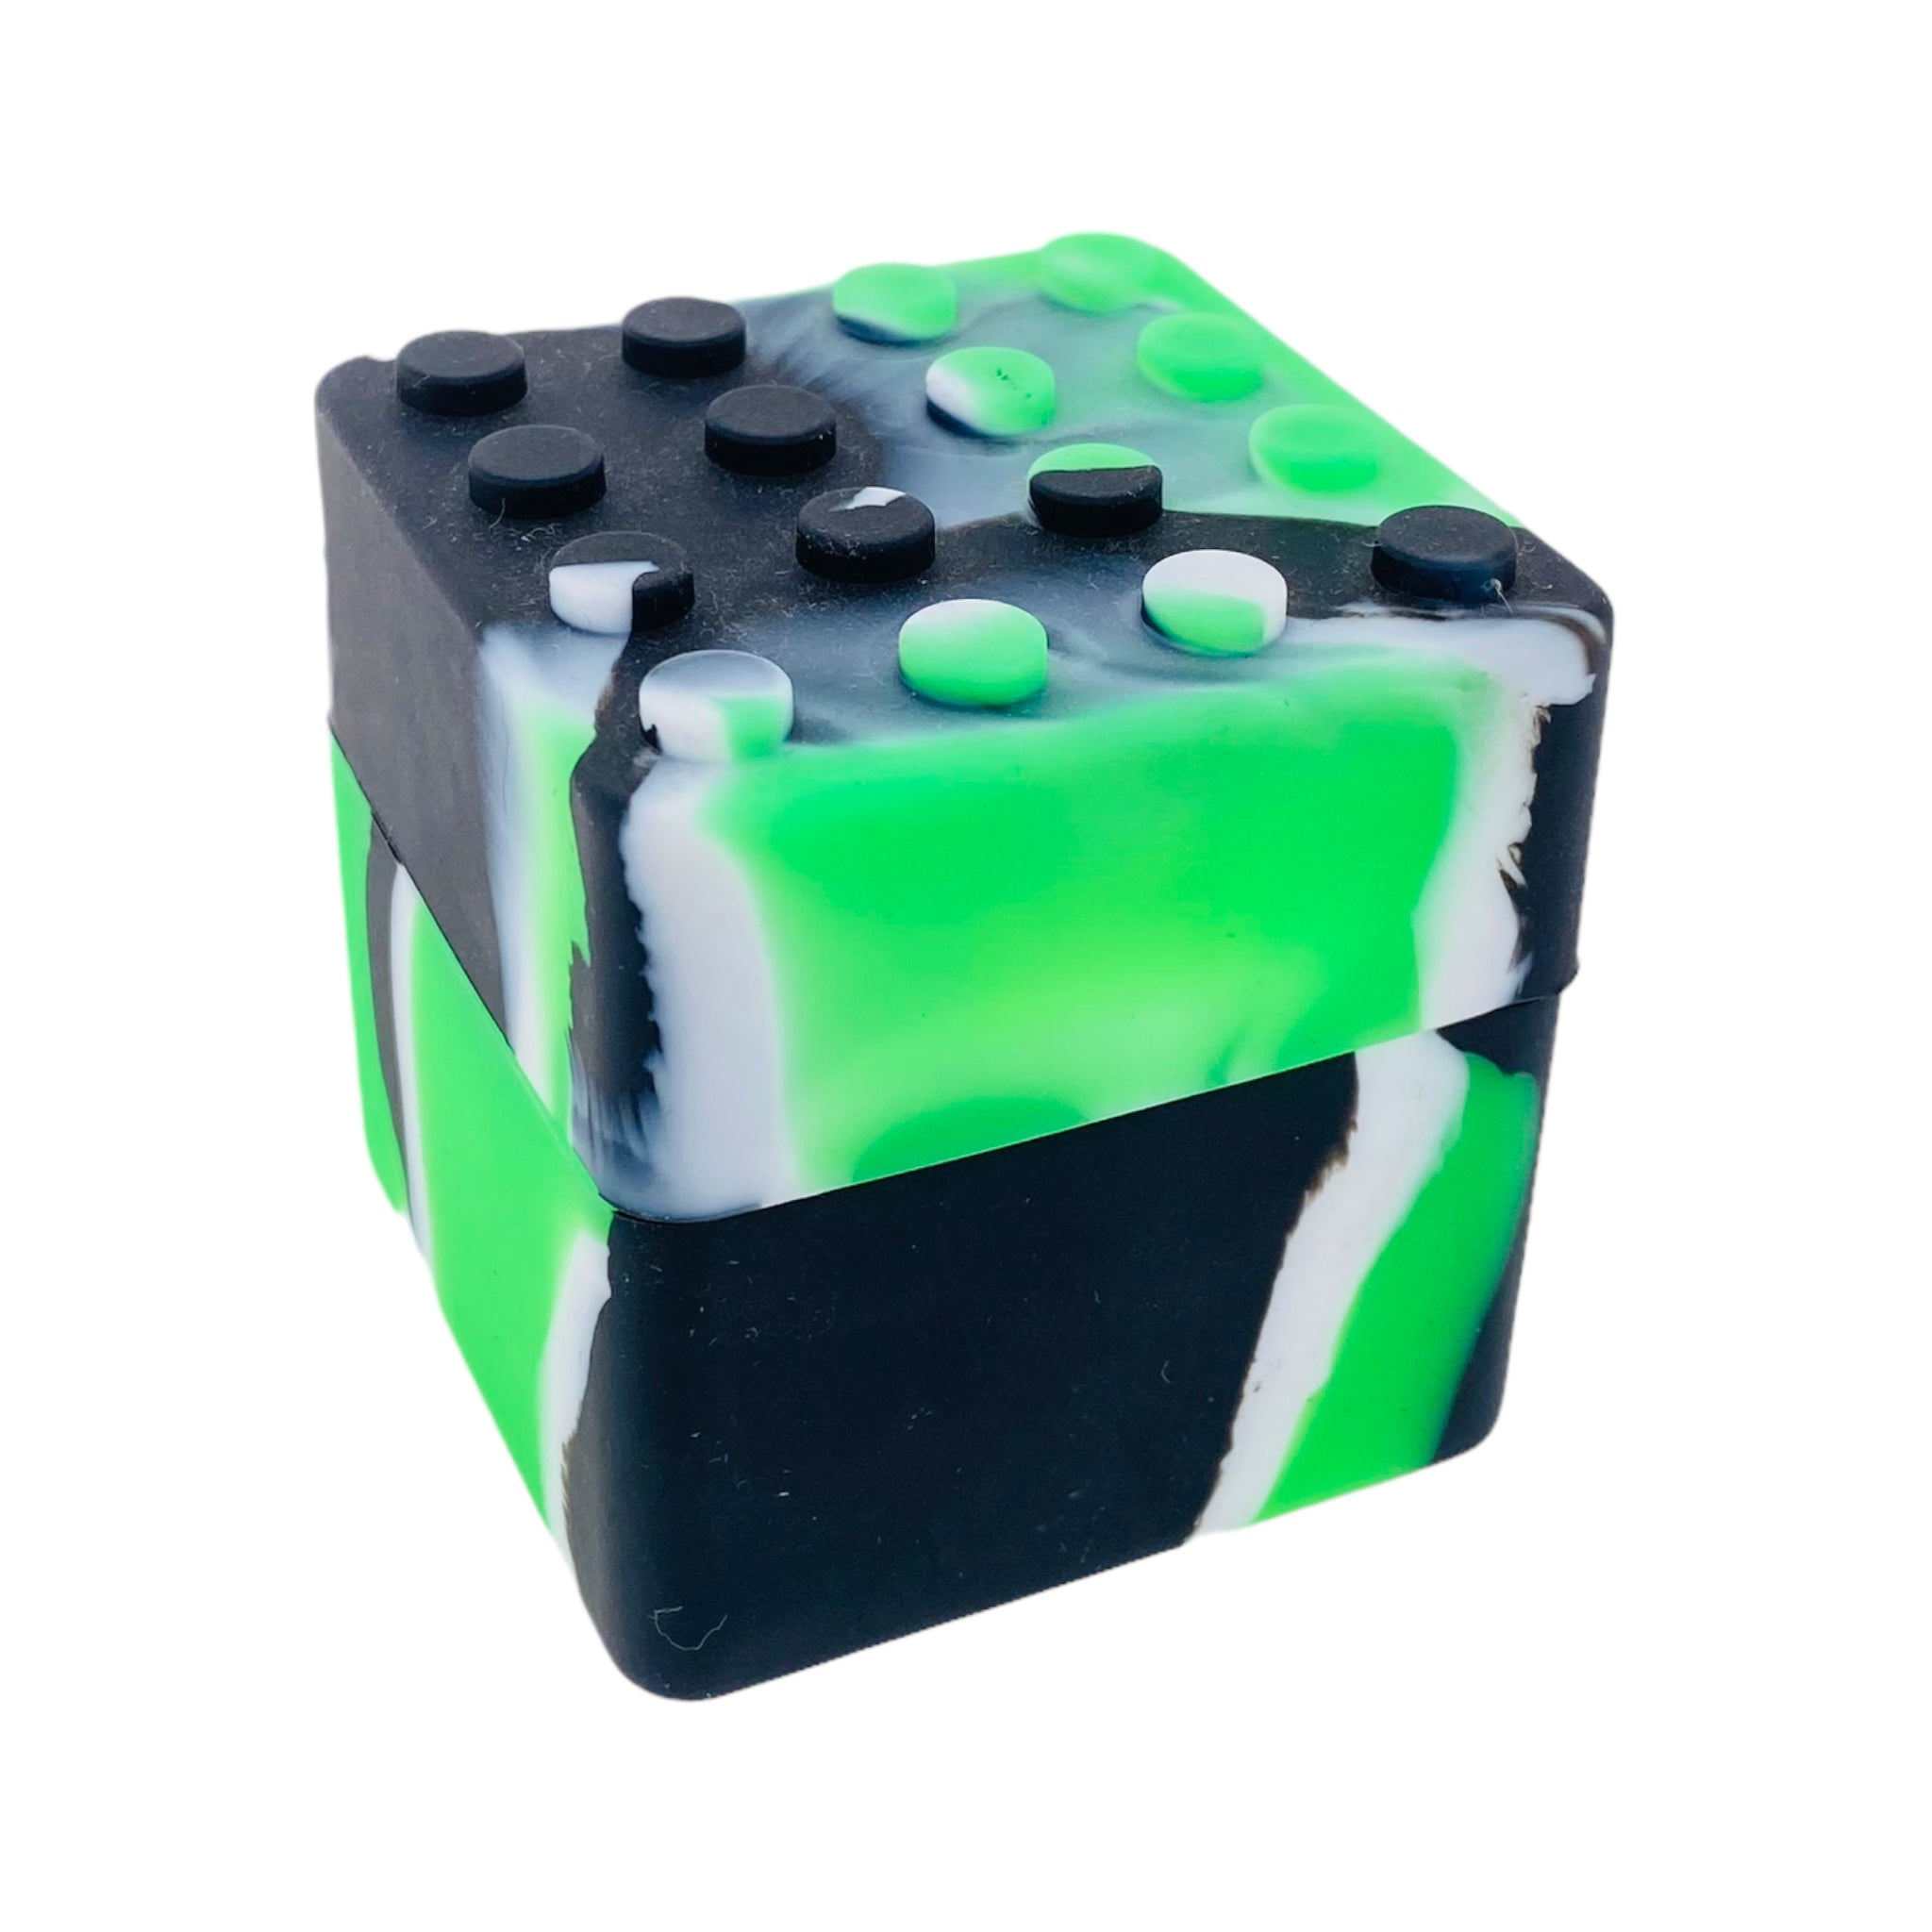 Large Square Silicone Container Green, White & Black